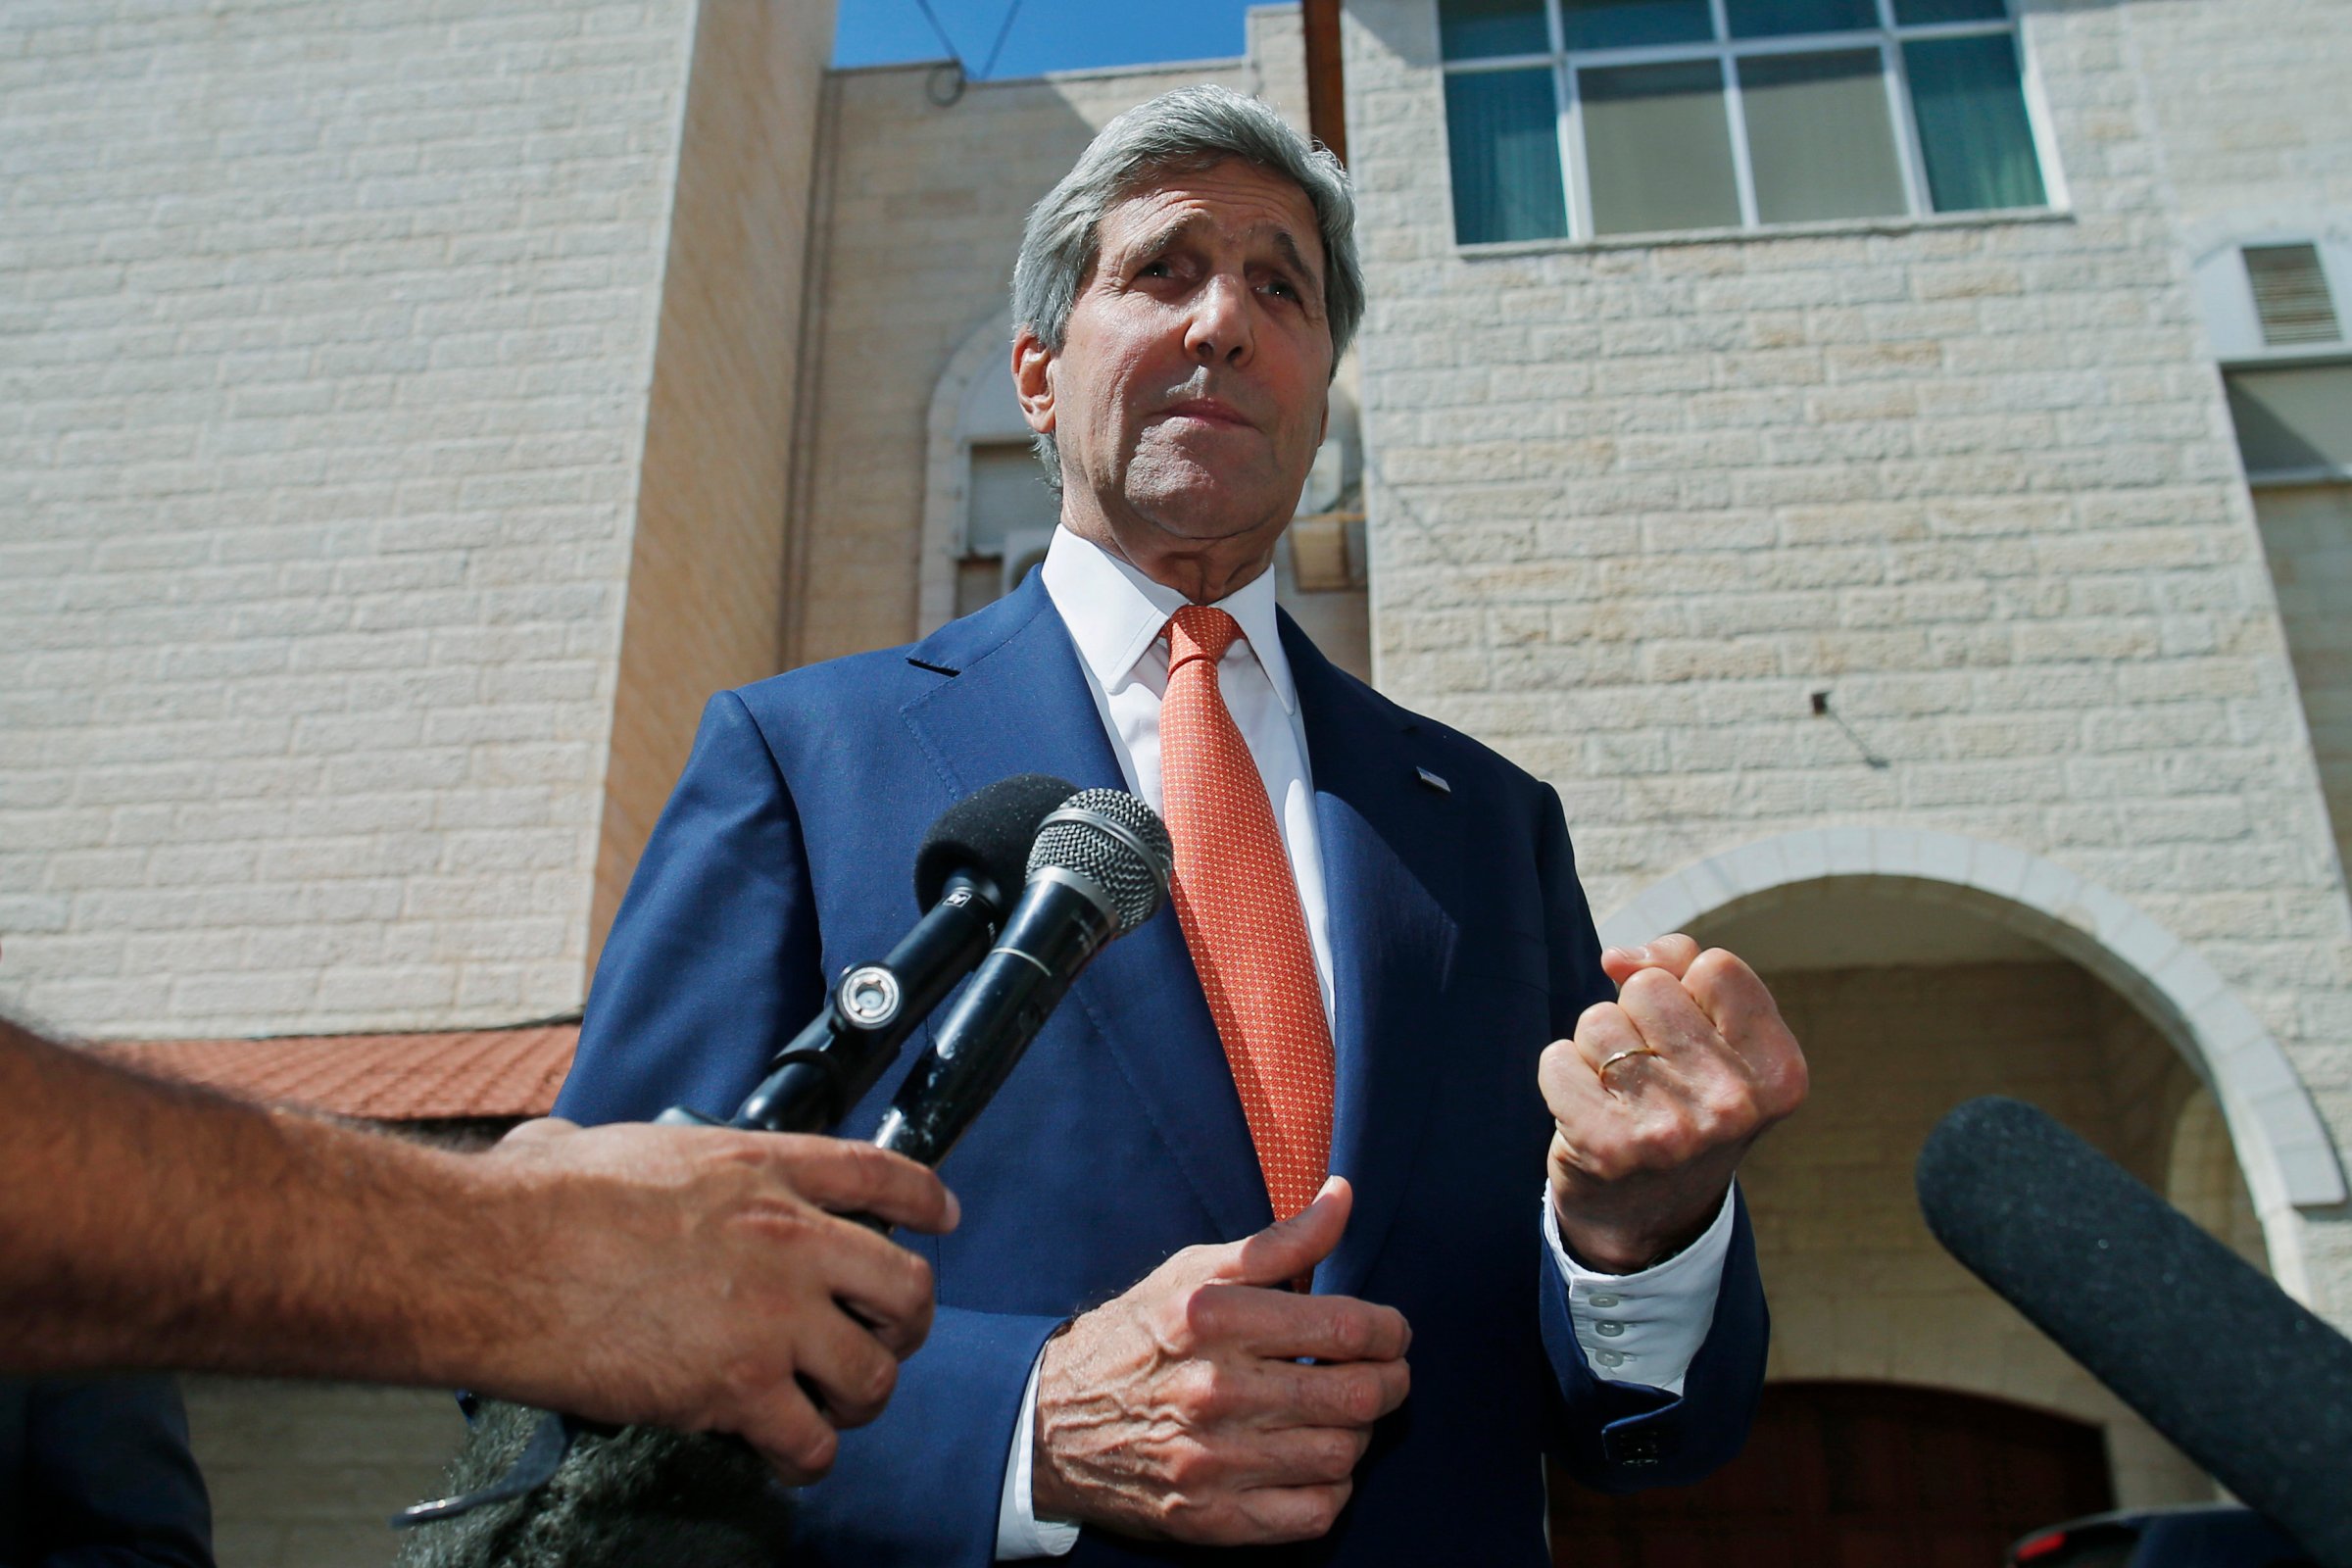 U.S. Secretary of State John Kerry speaks to reporters after meeting with Palestinian President Mahmoud Abbas in the West Bank city of Ramallah on July 23, 2014.